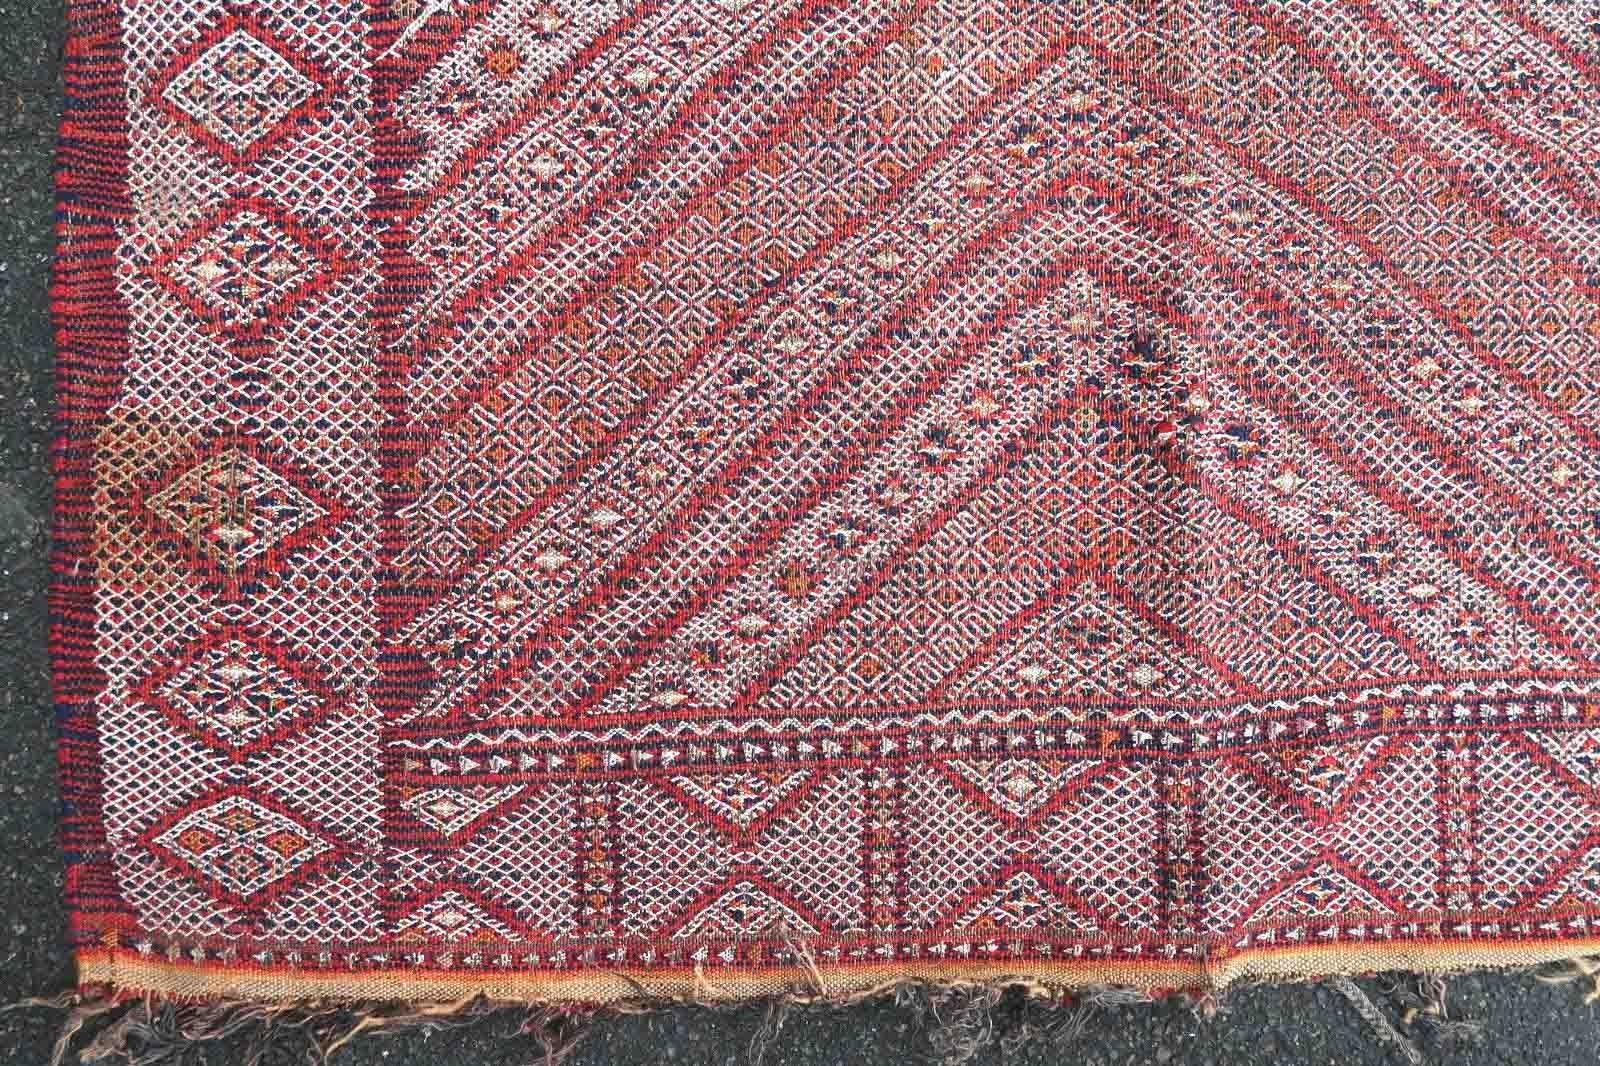 Handmade antique Moroccan Berber kilim in geometric design from Atlas region. The rug is from the end of 19th century generally in good condition, it has some age wear and old restorations. This type of rugs has been made for a personal use and not